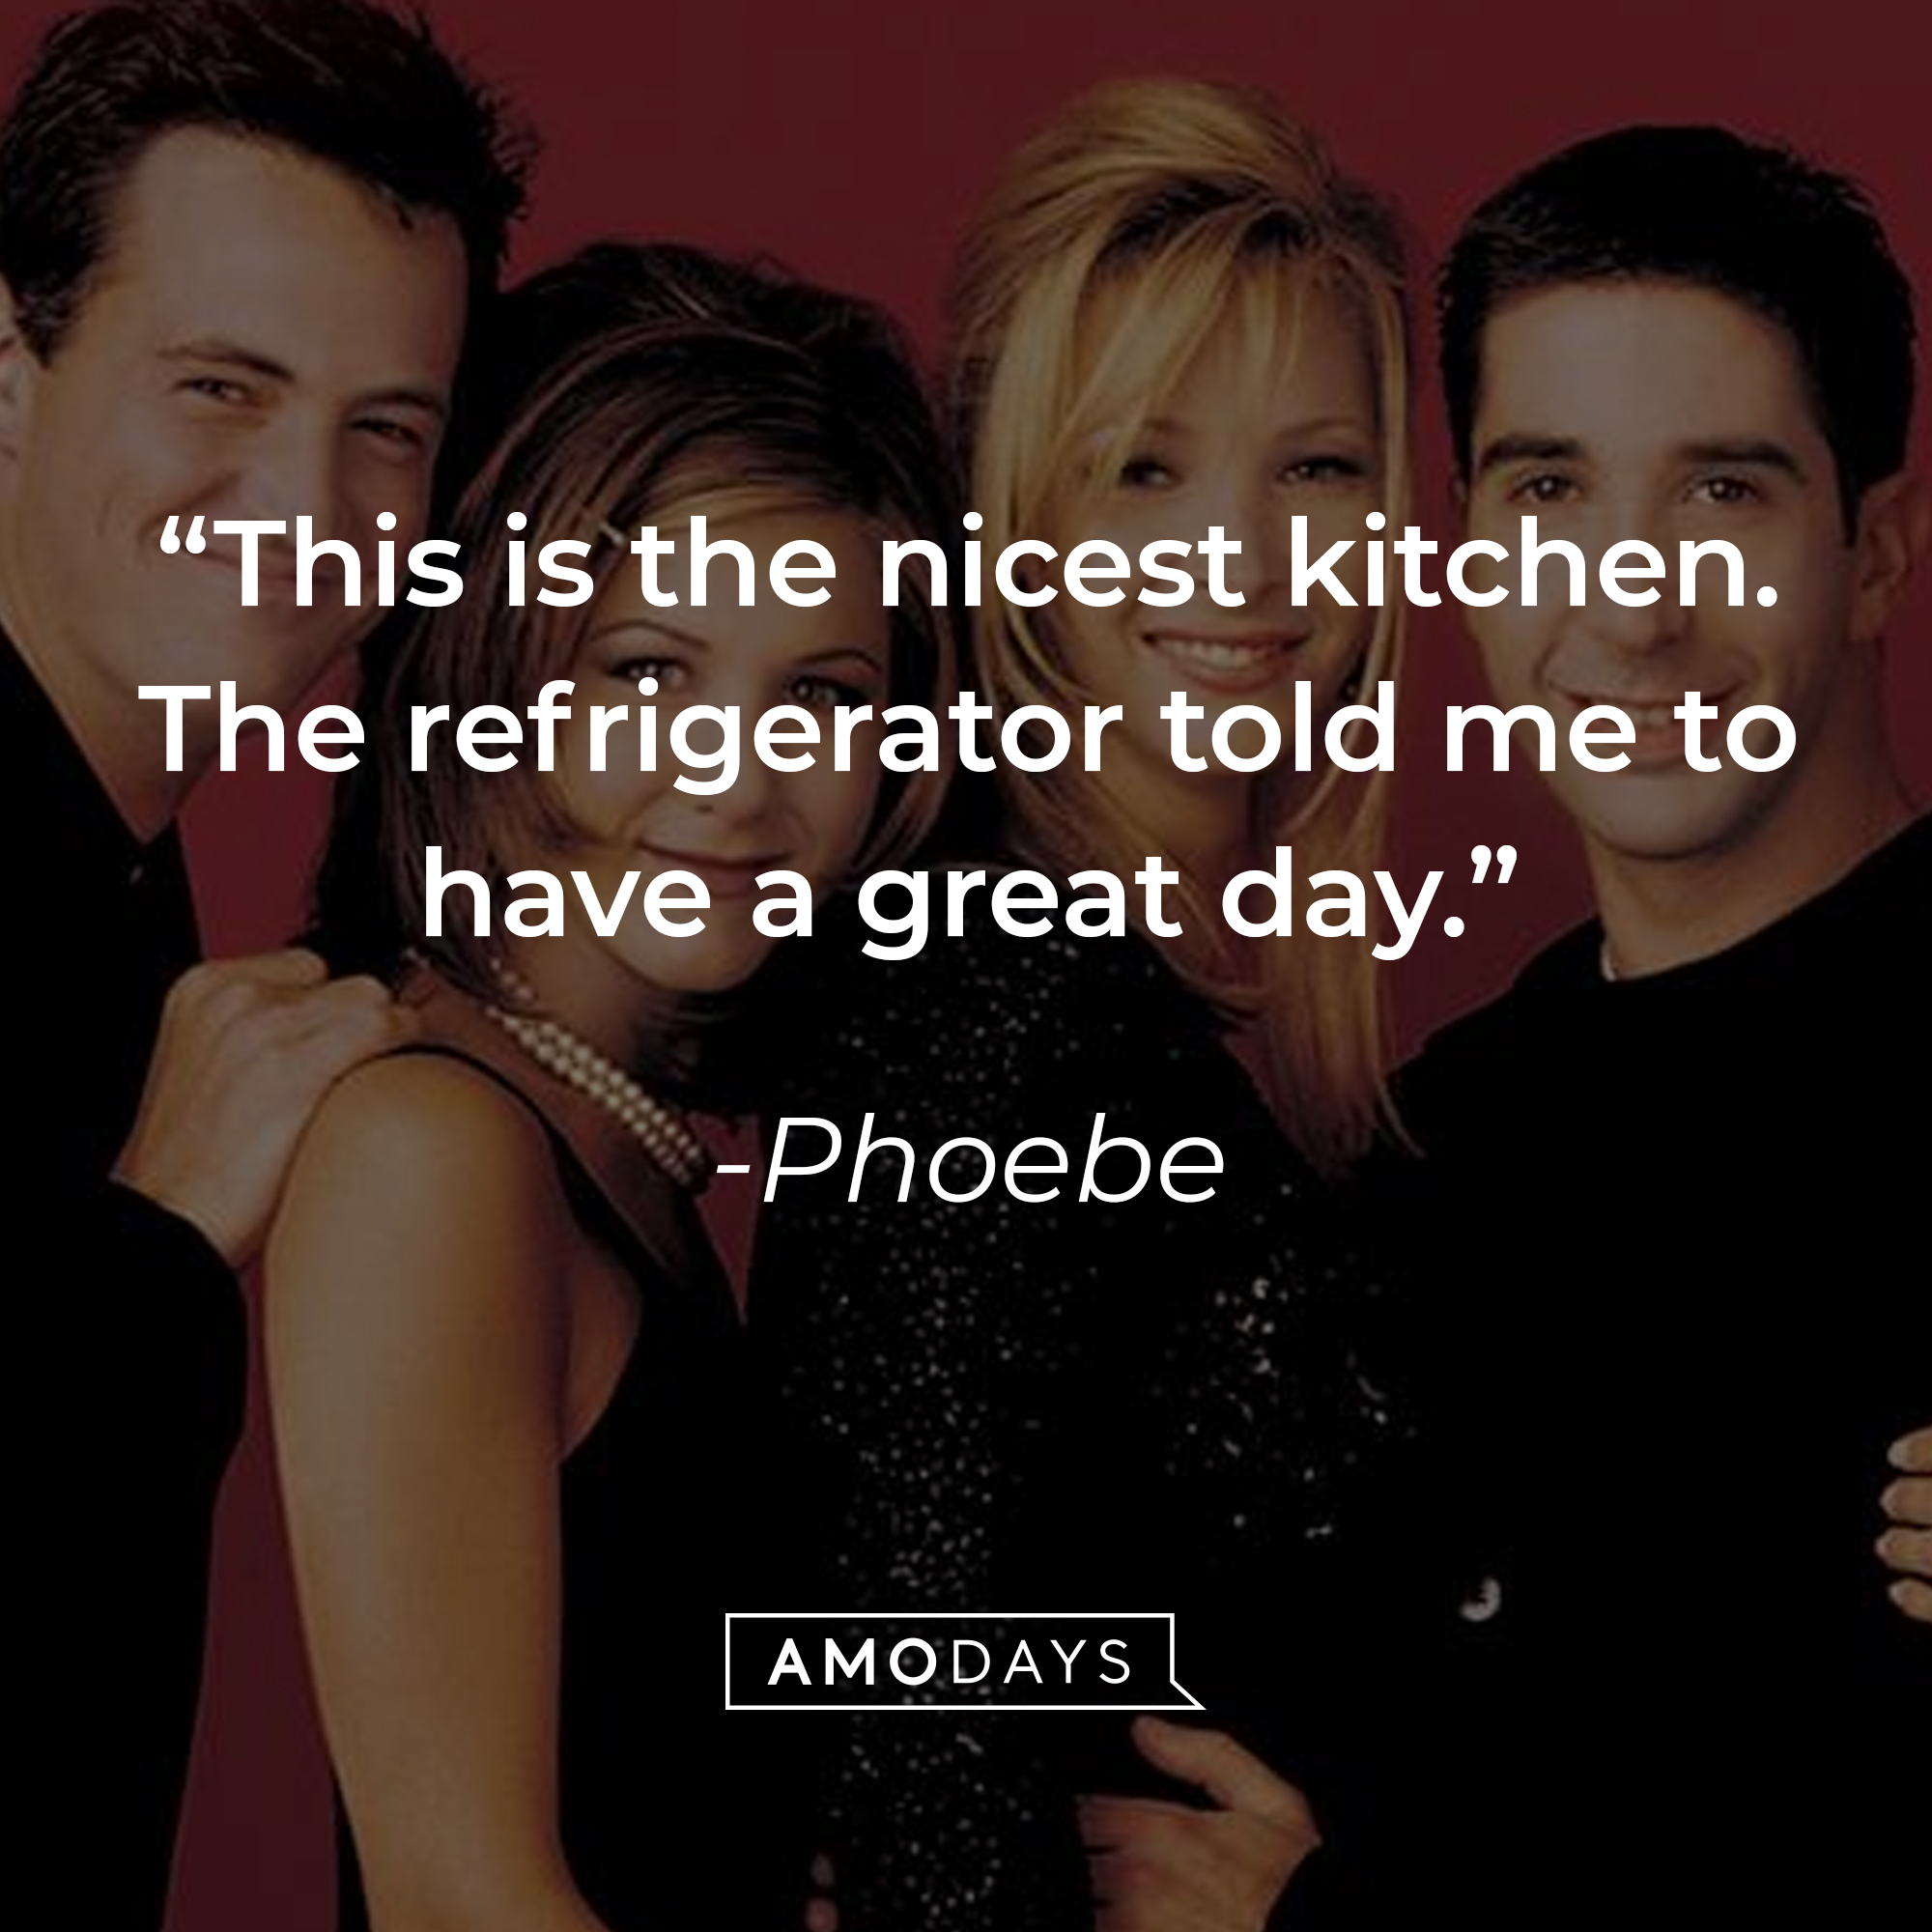 Phoebe's quote: "This is the nicest kitchen. The refrigerator told me to have a great day." | Source: Facebook.com/friends.tv